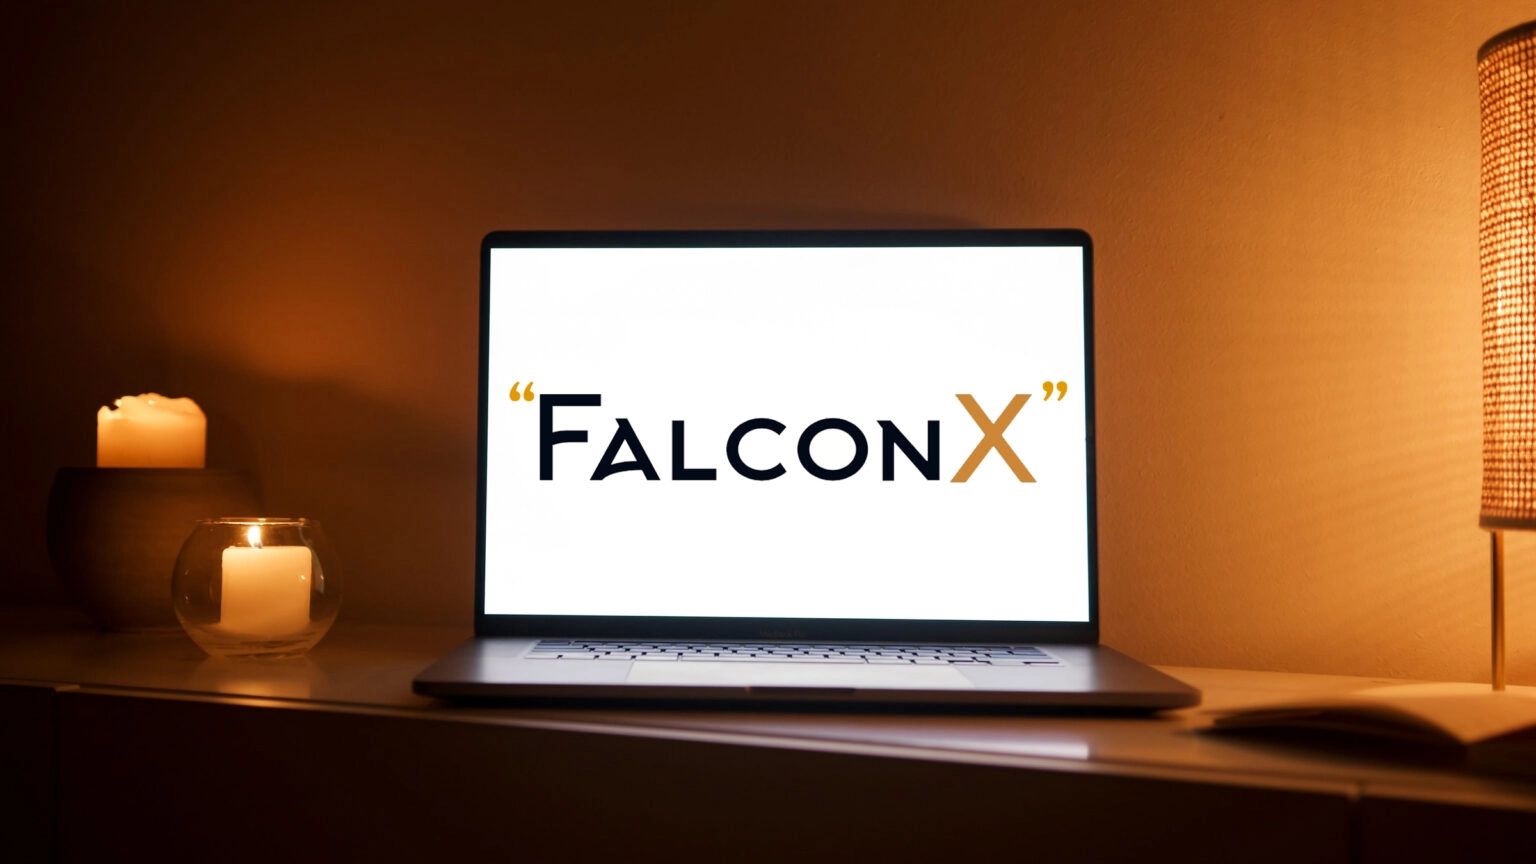 FalconX raises $17M to power its crypto trading service | TechCrunch